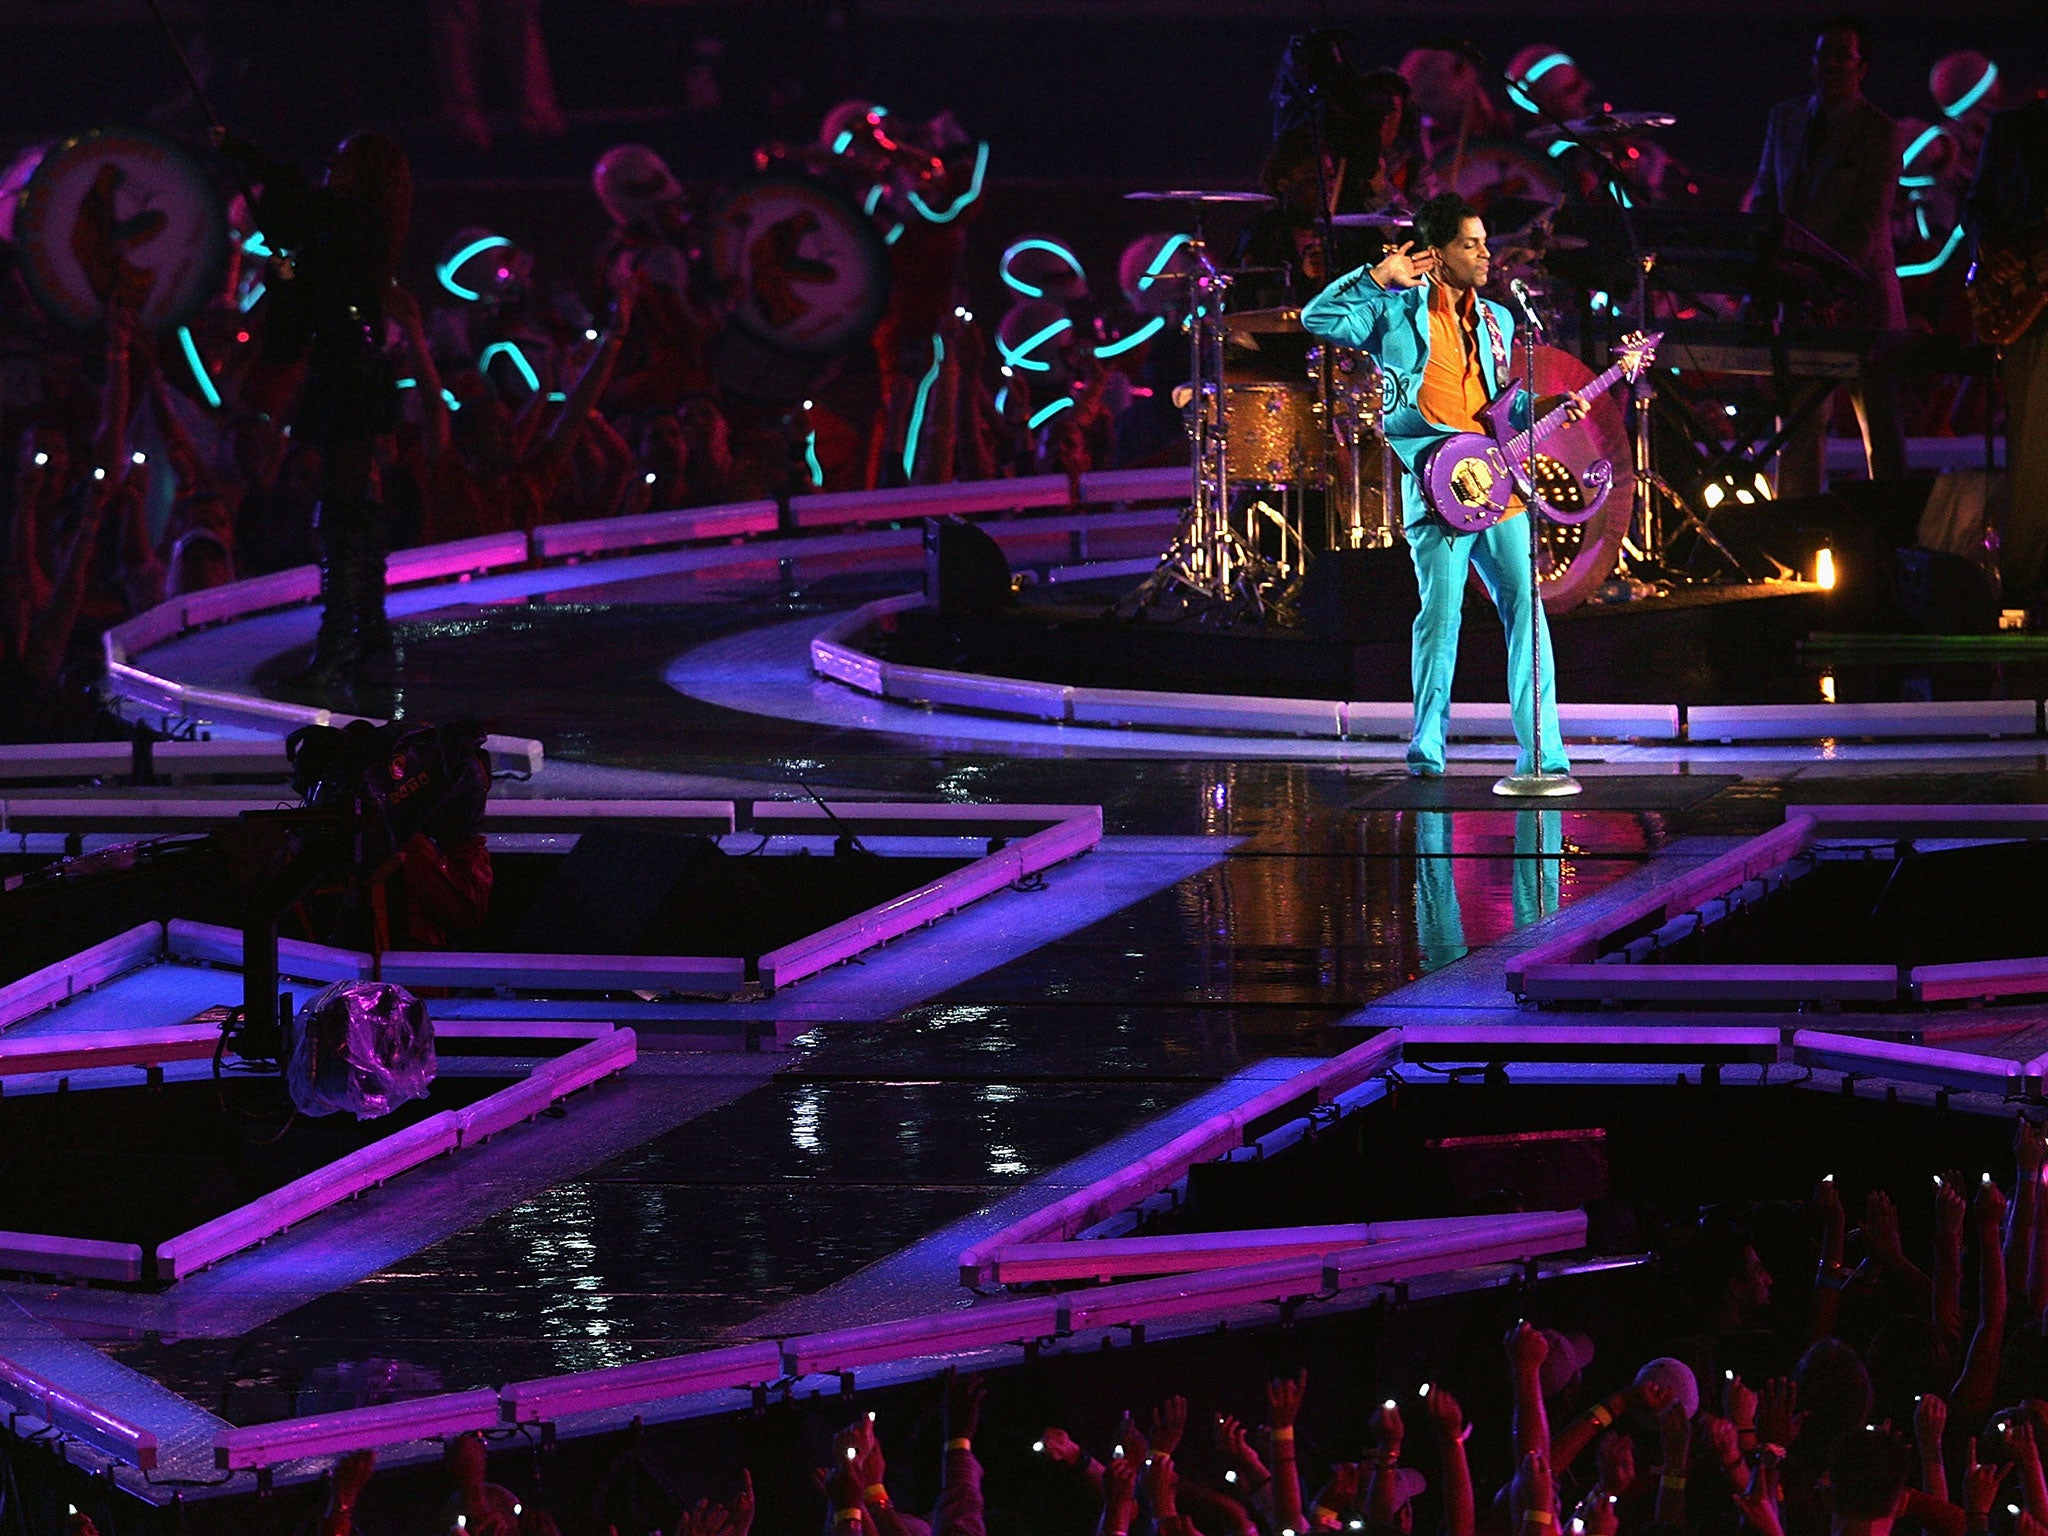 Prince performs during the 'Pepsi Halftime Show' at Super Bowl XLI on February 4, 2007